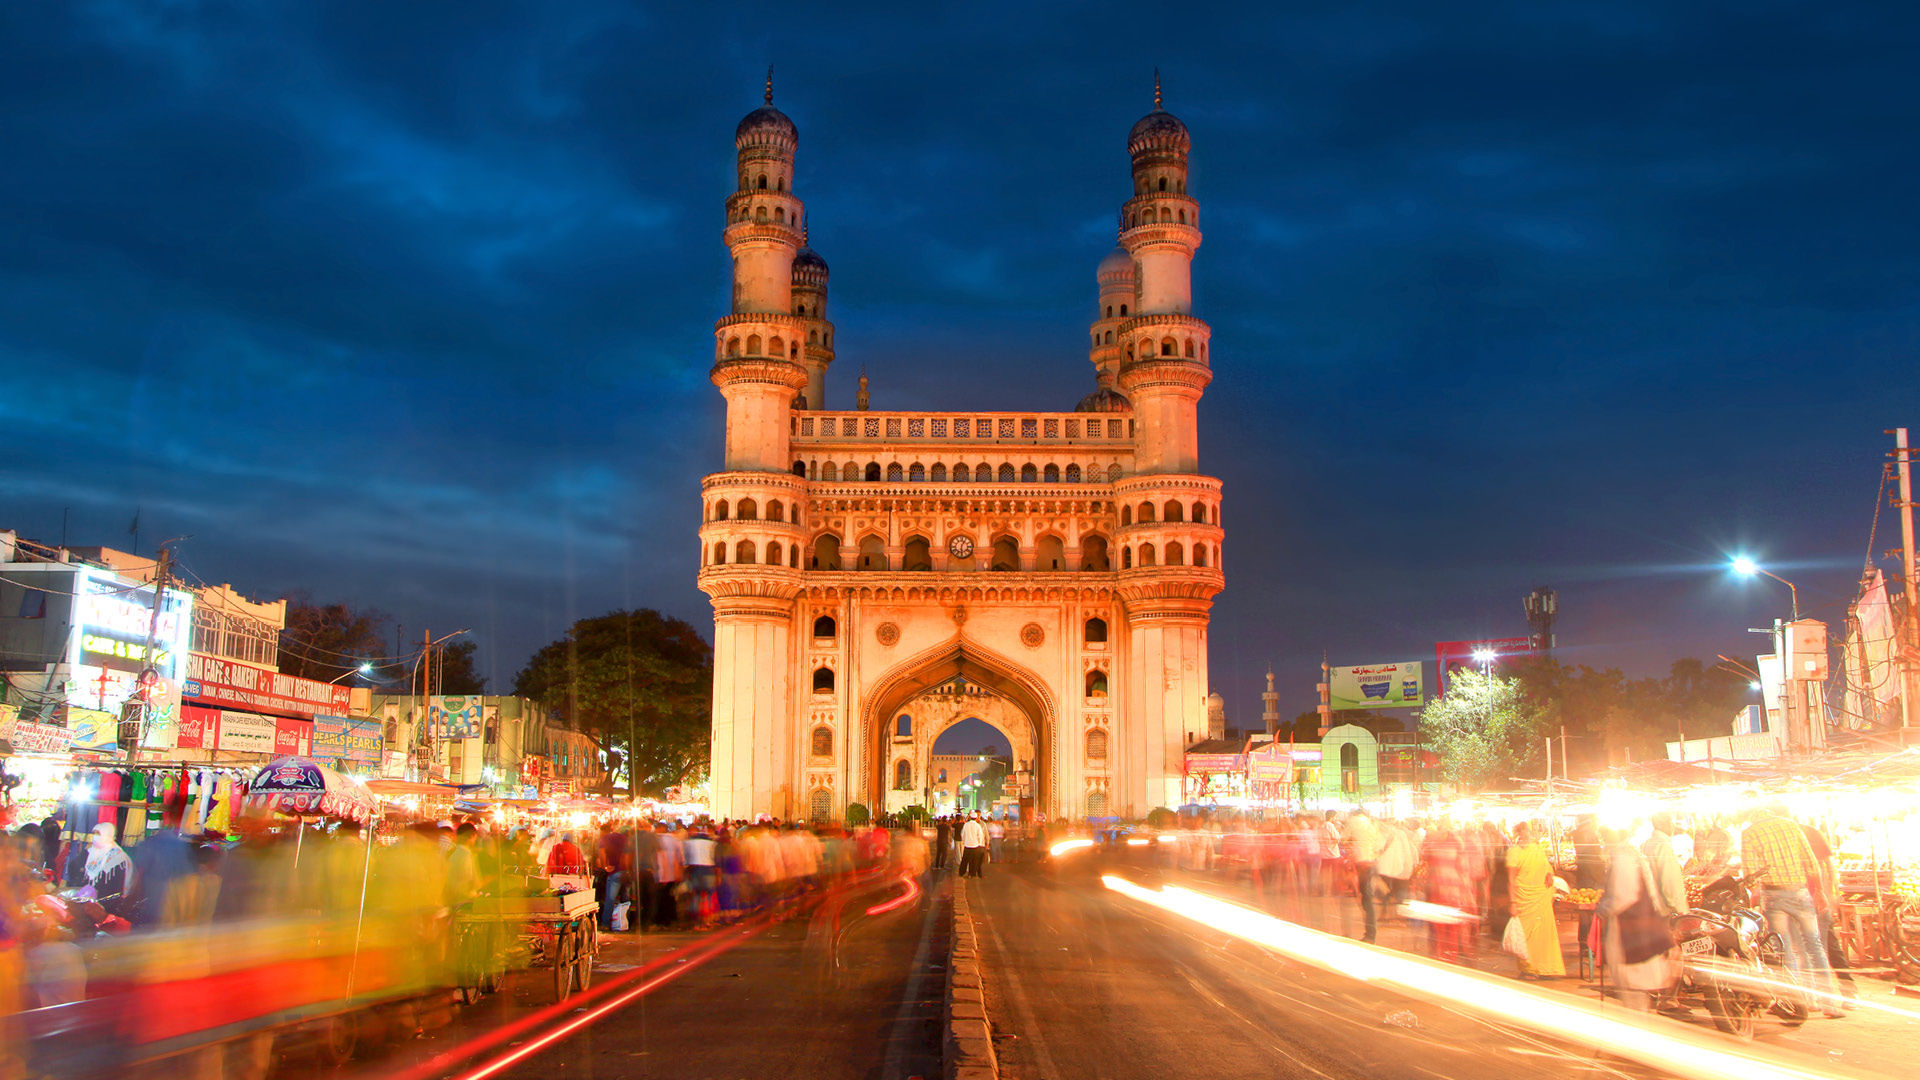 Hyderabad The City Of Nawabs, Their Stories And All Things Love!